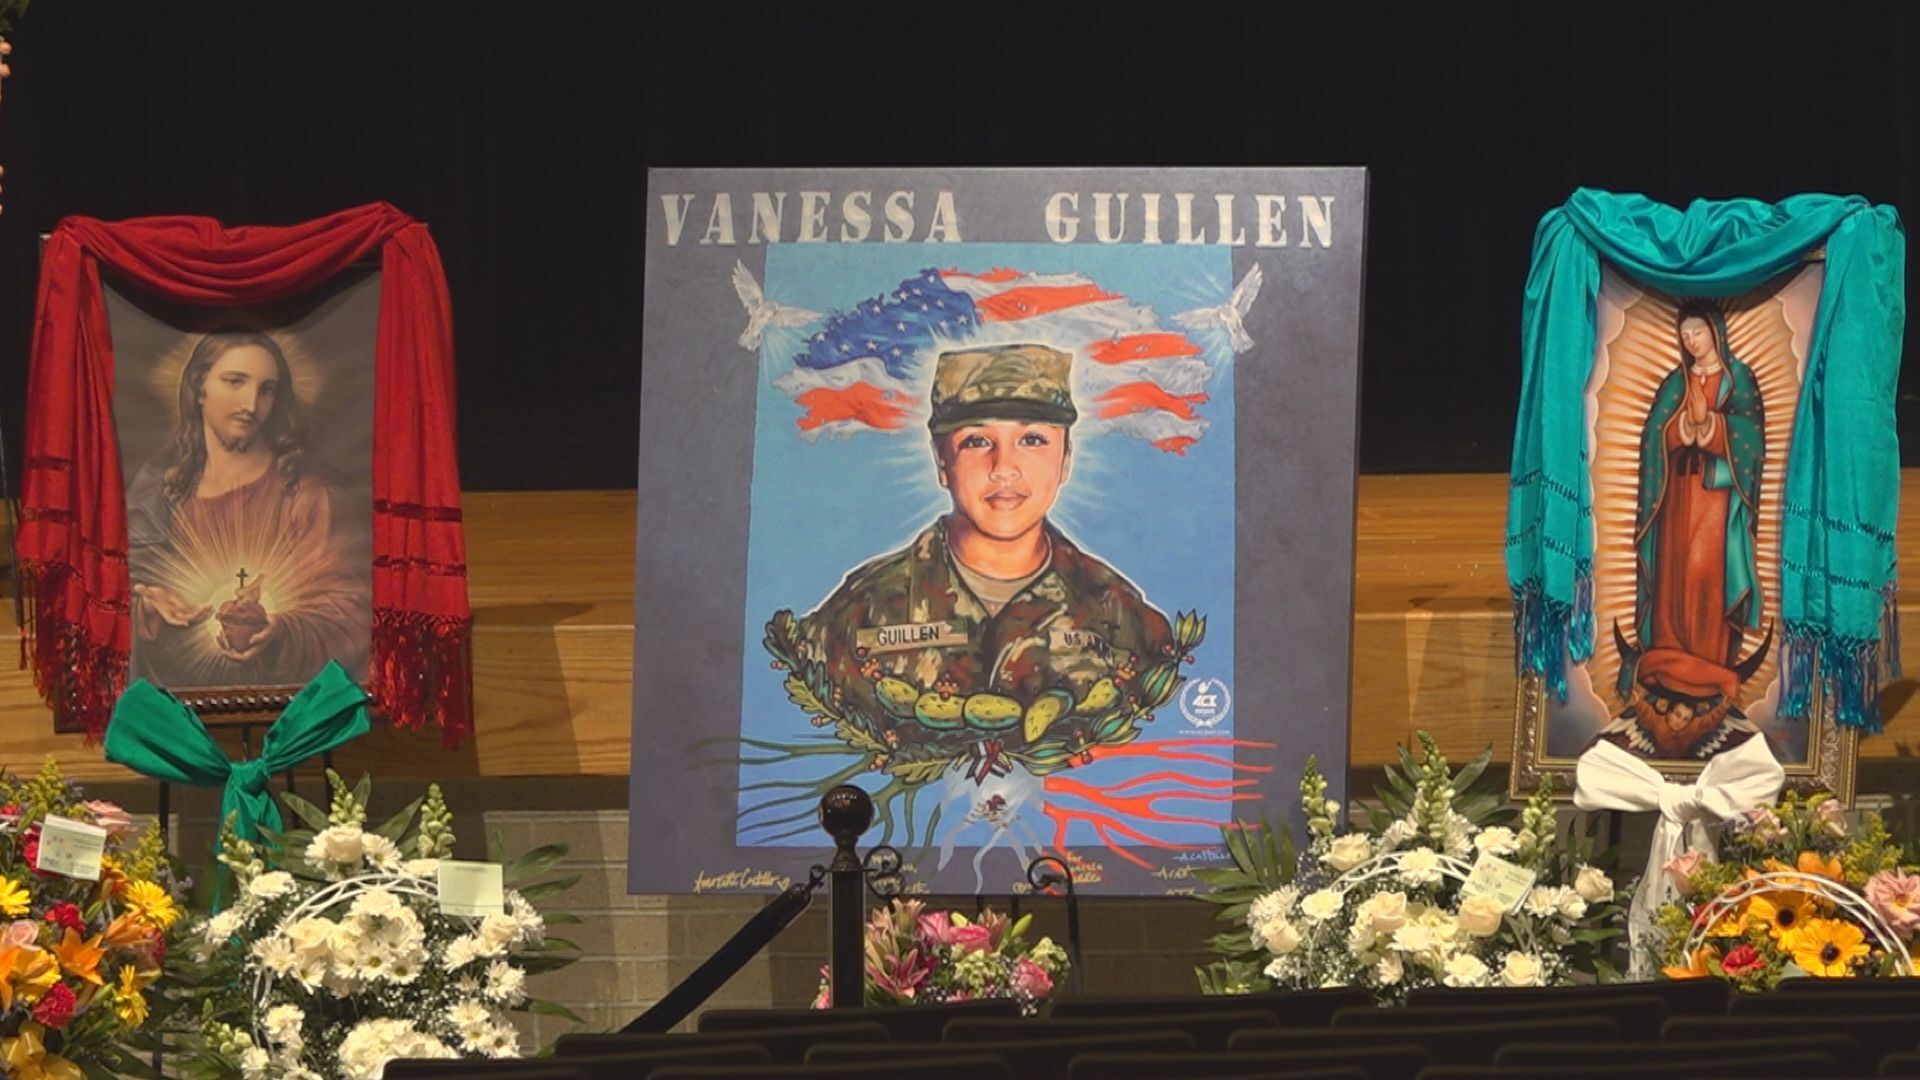 Vanessa Guillen's tragic death inspired a nationwide movement for change in how the military handles sexual harassment and assault.